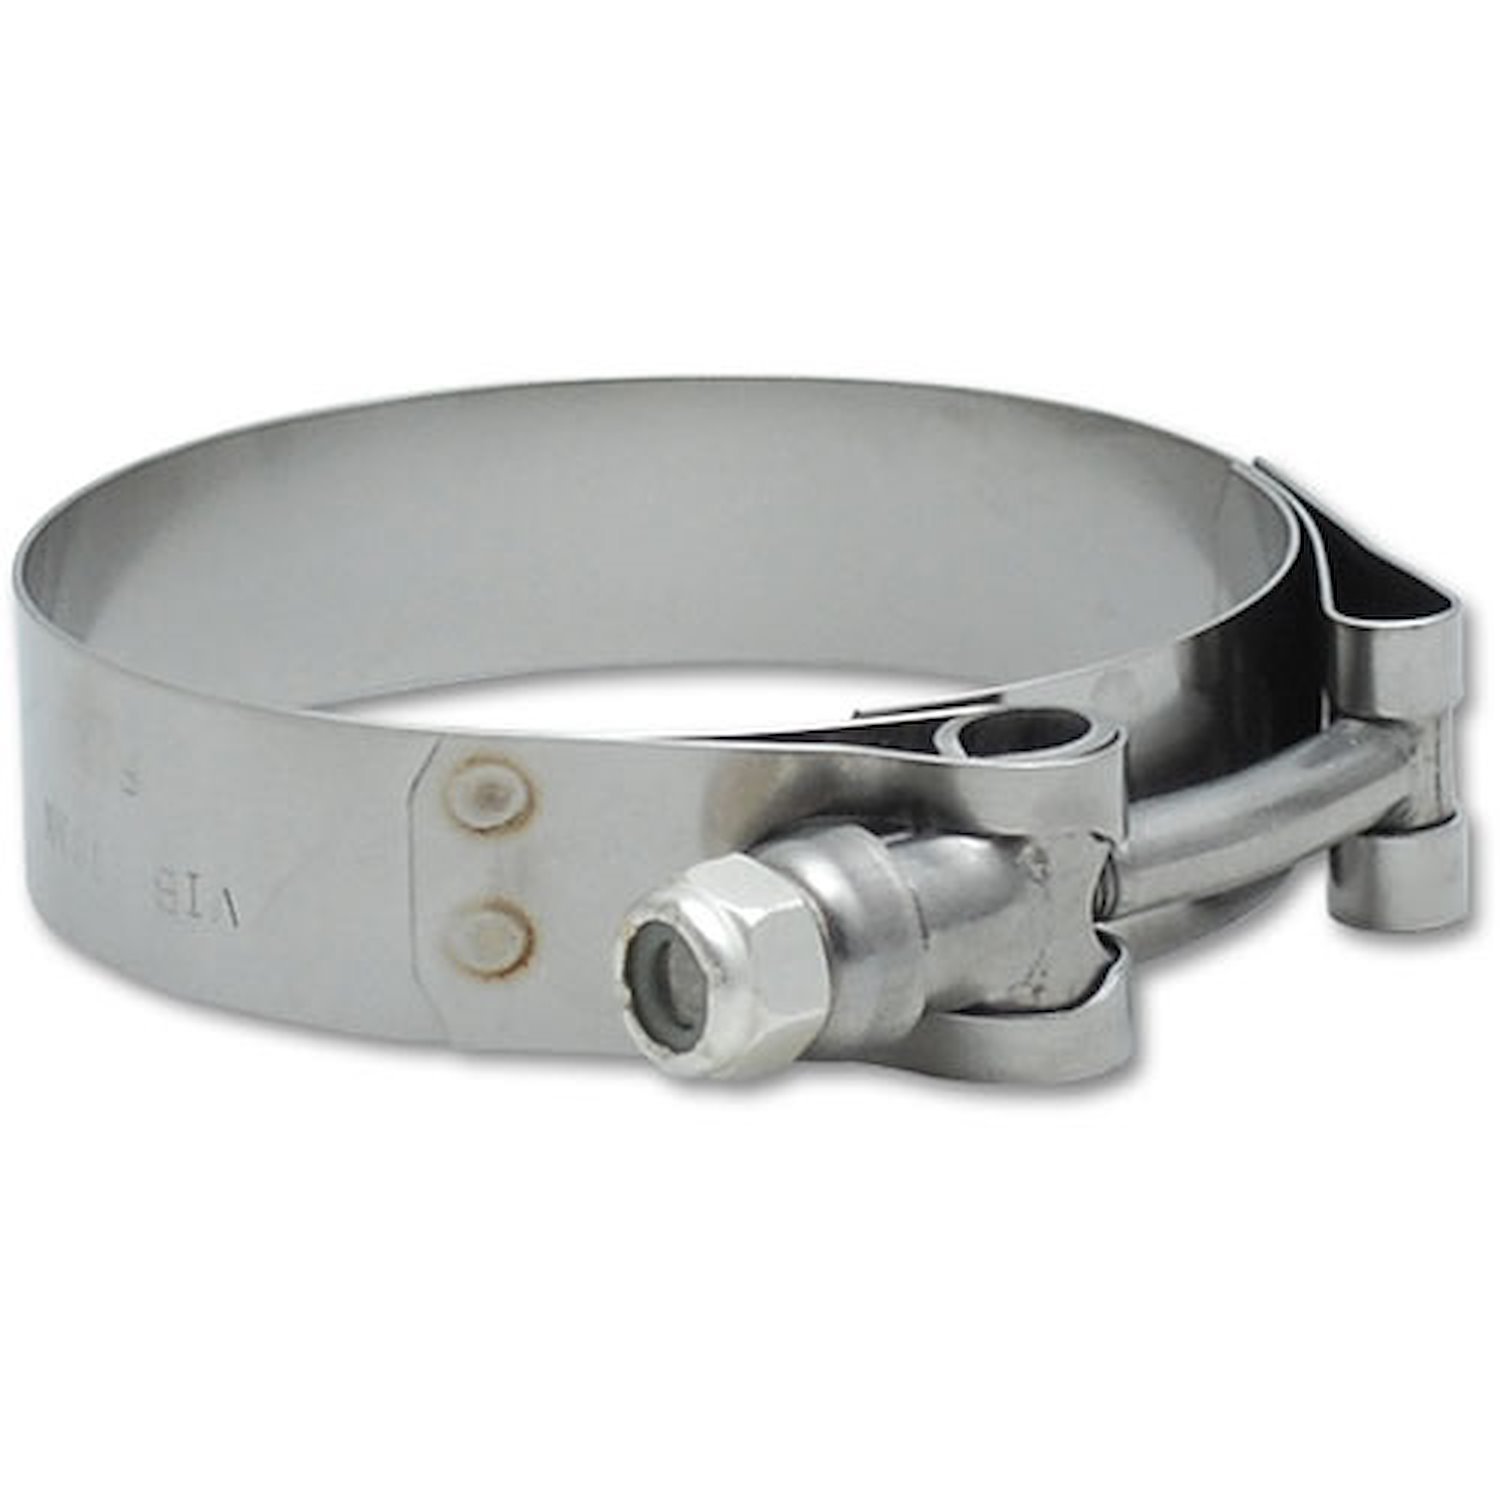 Stainless Steel T-Bolt Clamps Clamp Range 4.20" - 4.60"